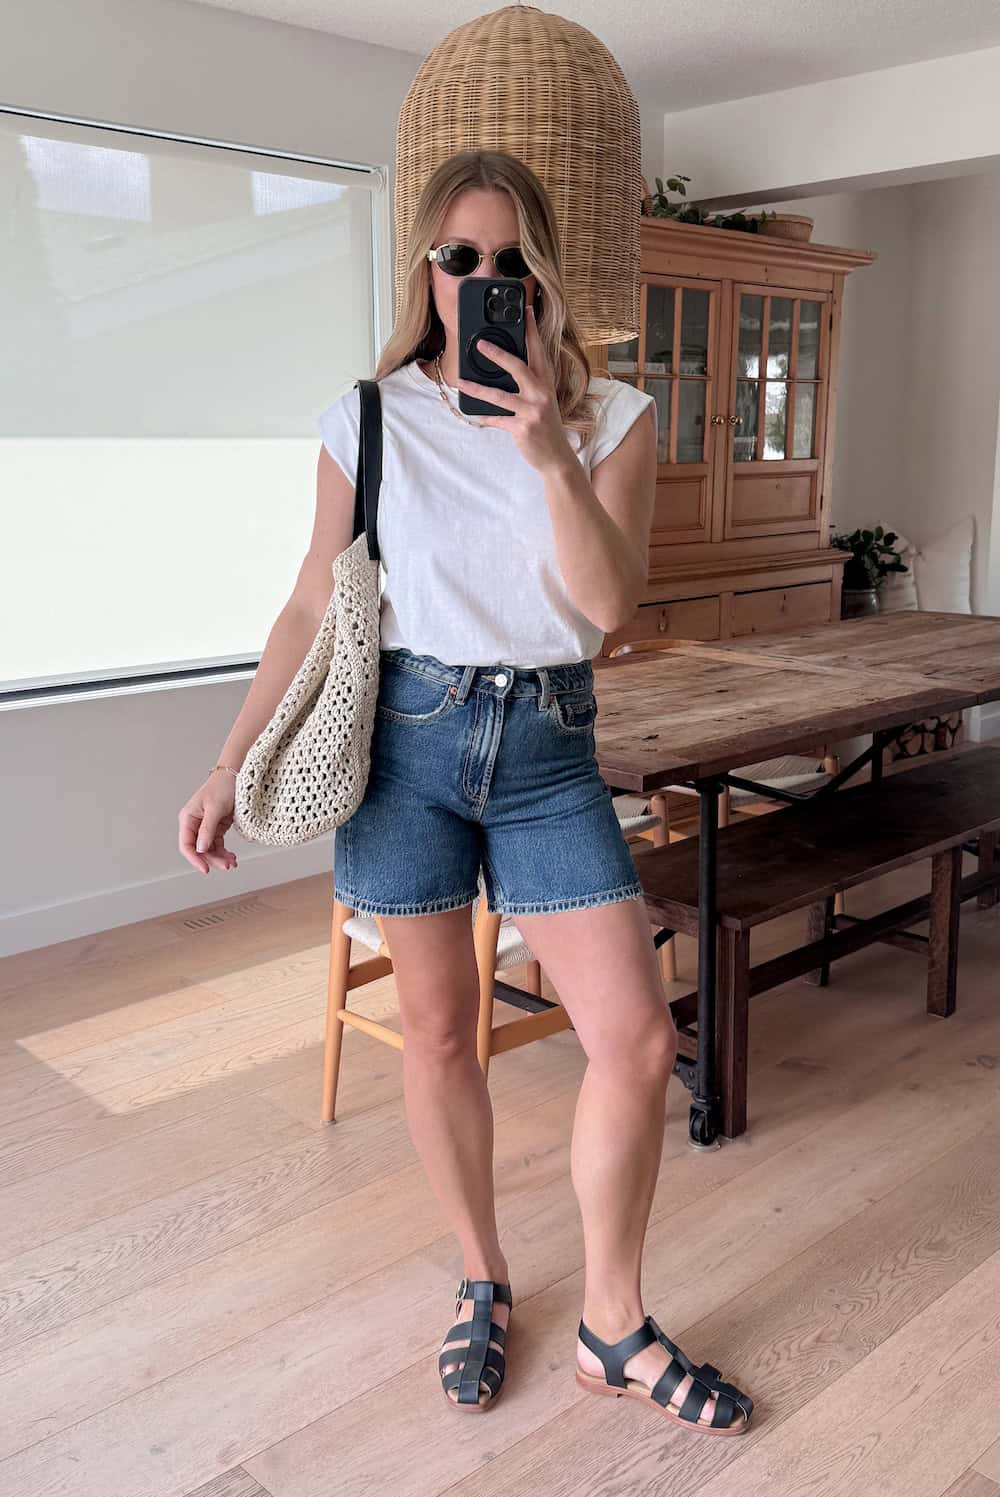 Christal wearing denim shorts with a white t-shirt and black sandals.